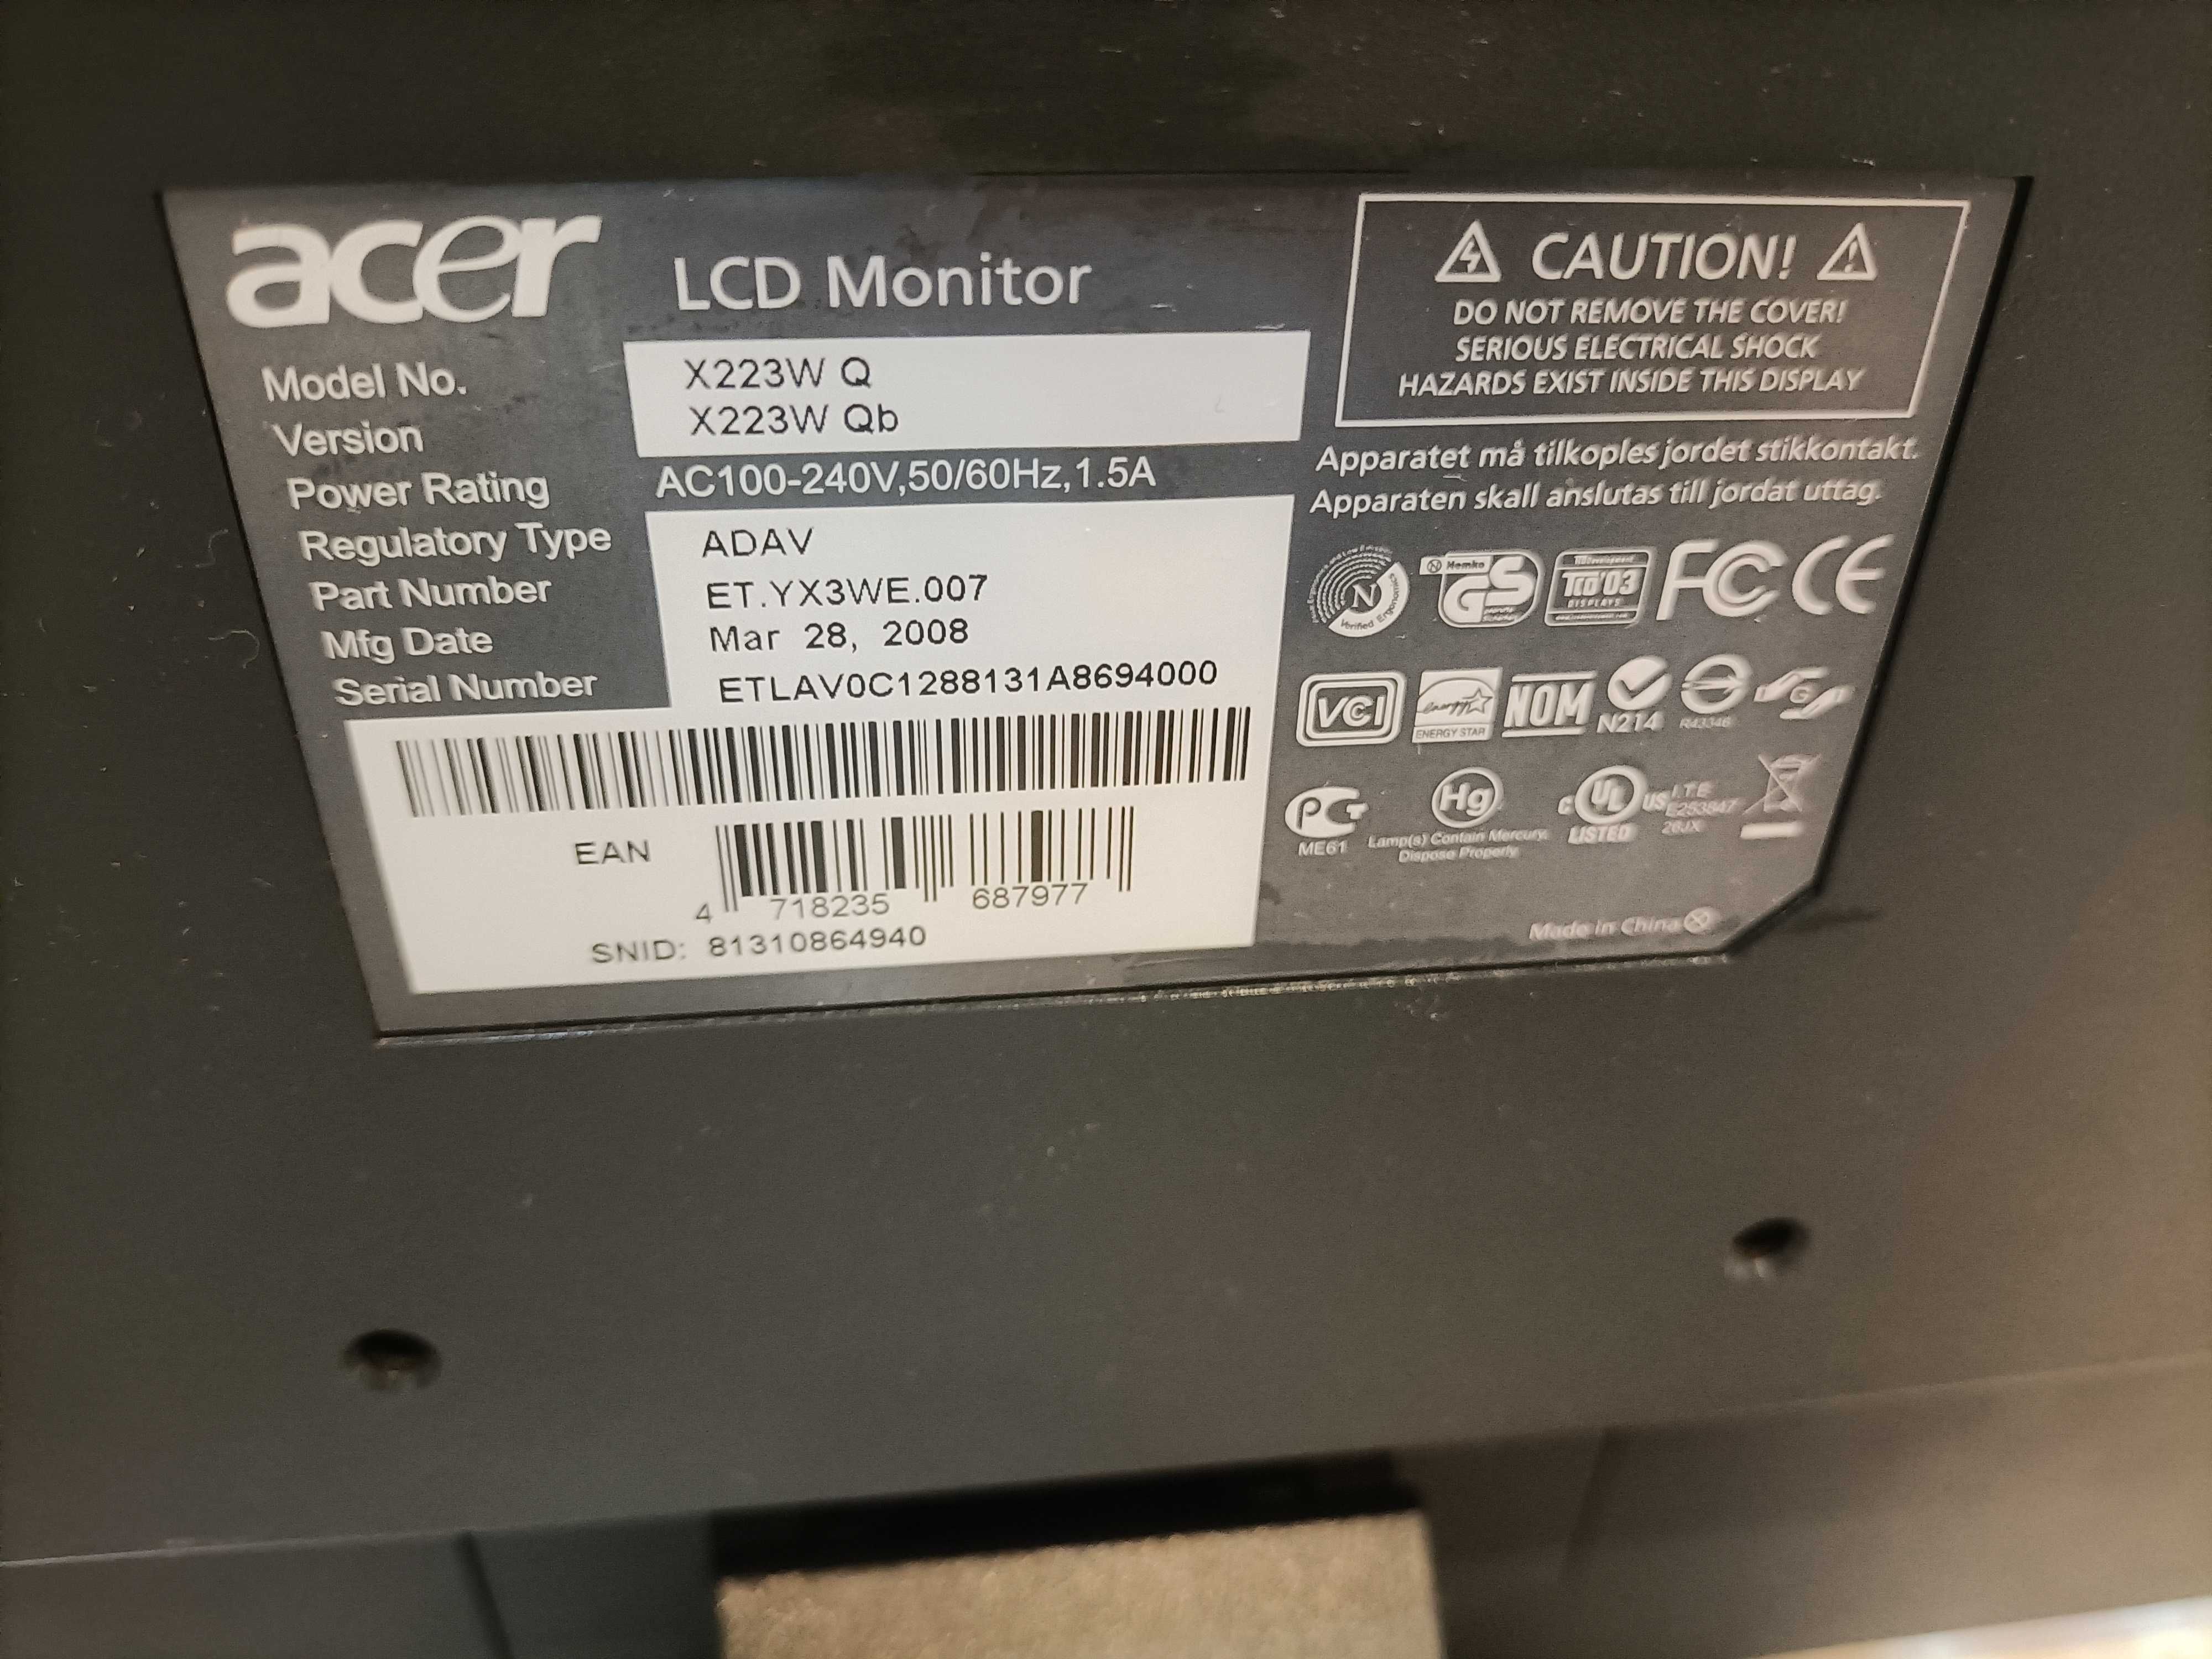 Acer X223W Q LCD 22" Monitor